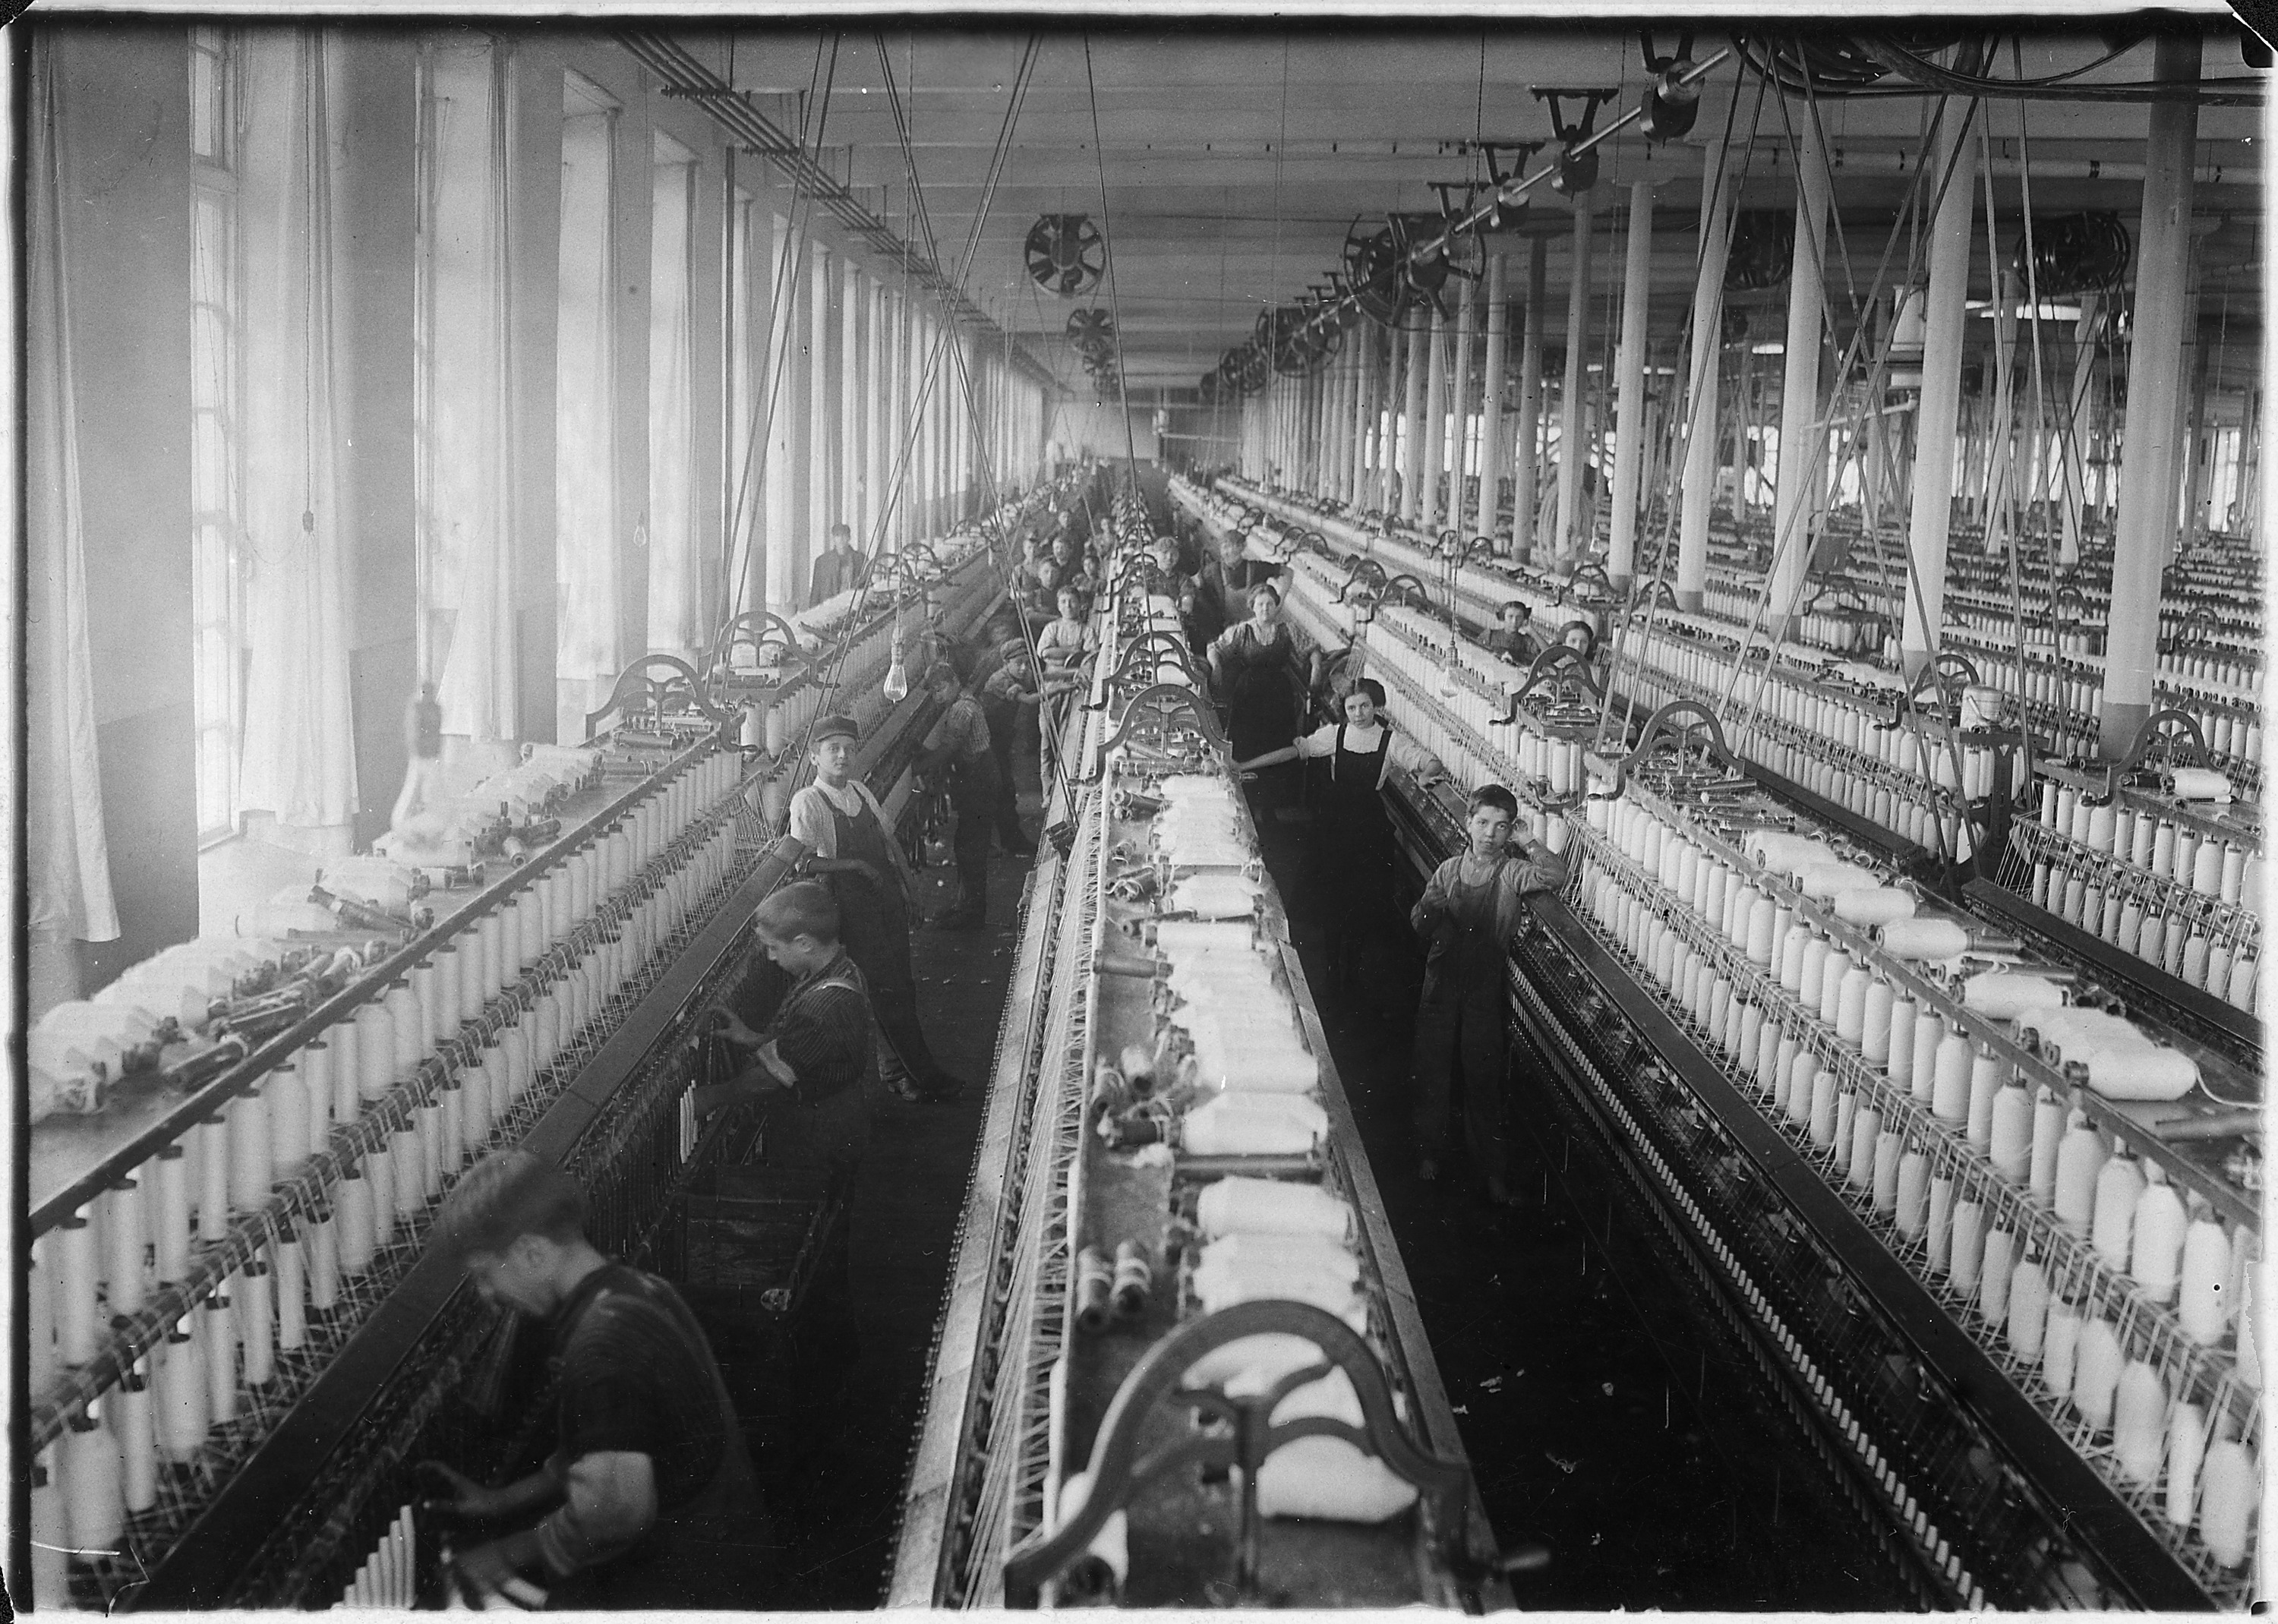 General view of spinning room, Cornell Mill, Fall River, Mass. - NARA - 523509